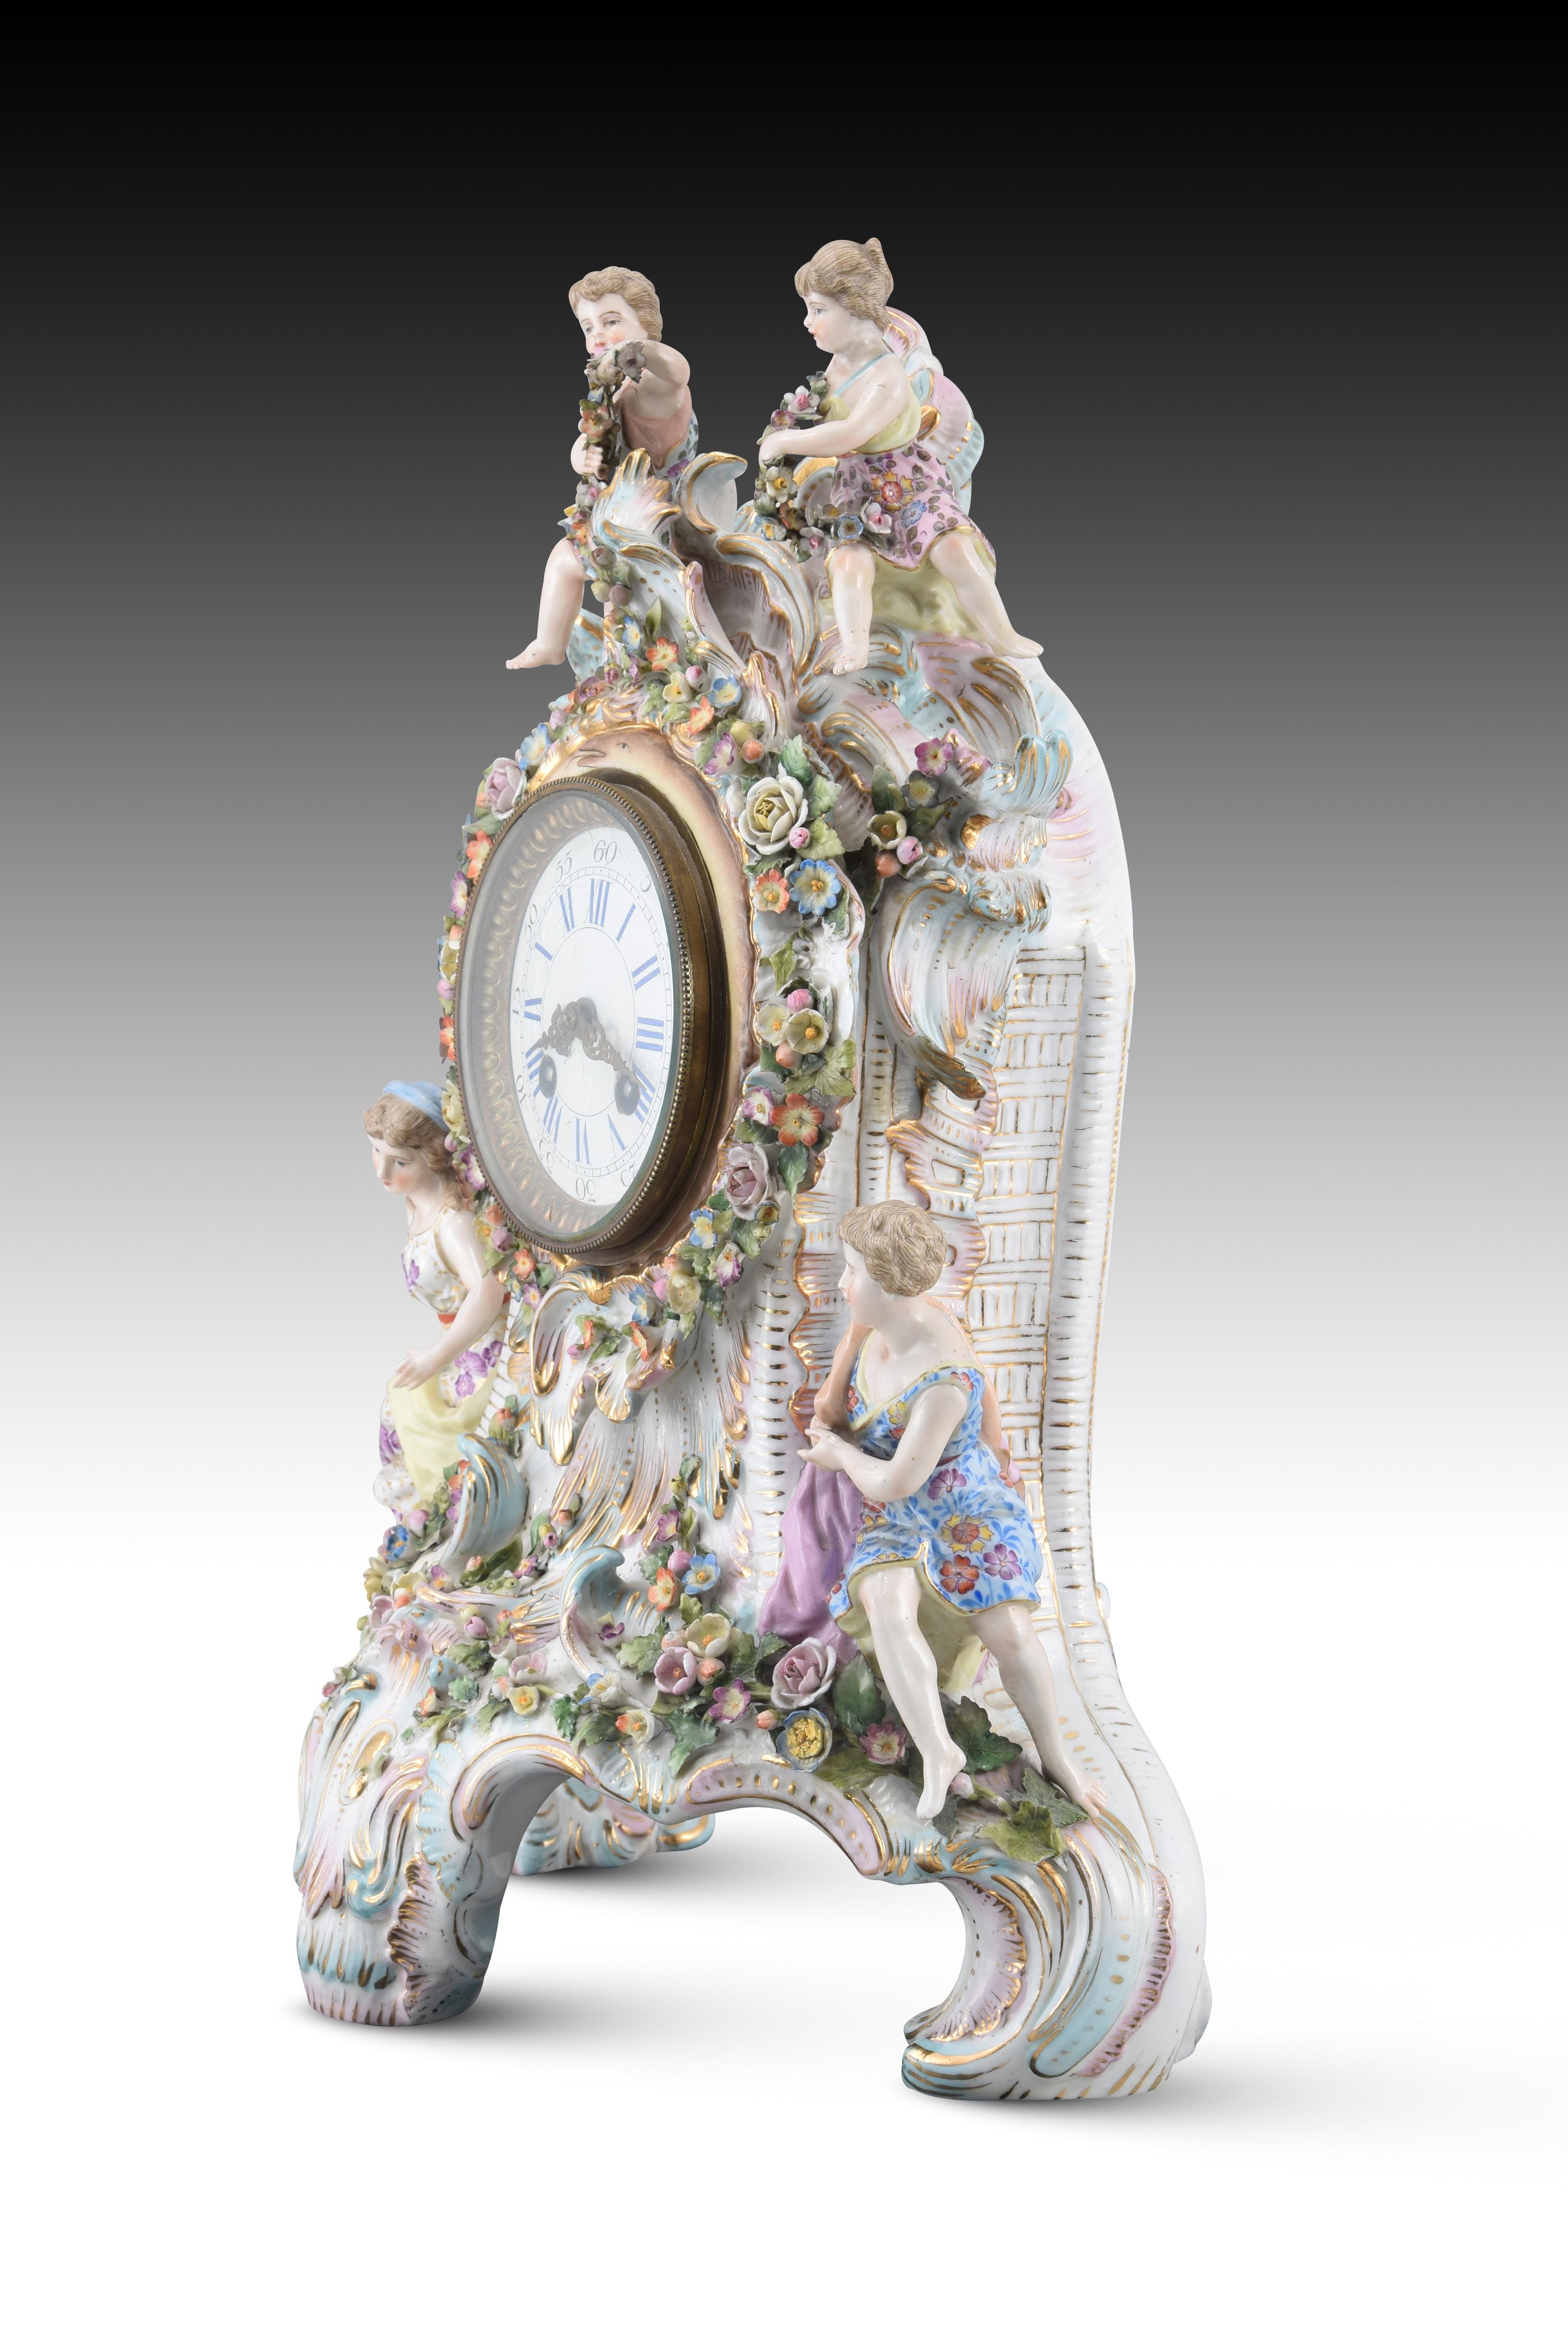 Clock. Porcelain, metal, glass. Lenzkirch, Germany, late 19th century. 
Has damage, figure arm. 
Table clock with Lenzkirch marked machinery, white dial with Roman numerals for the hours and Arabic numerals every five for the minutes. The